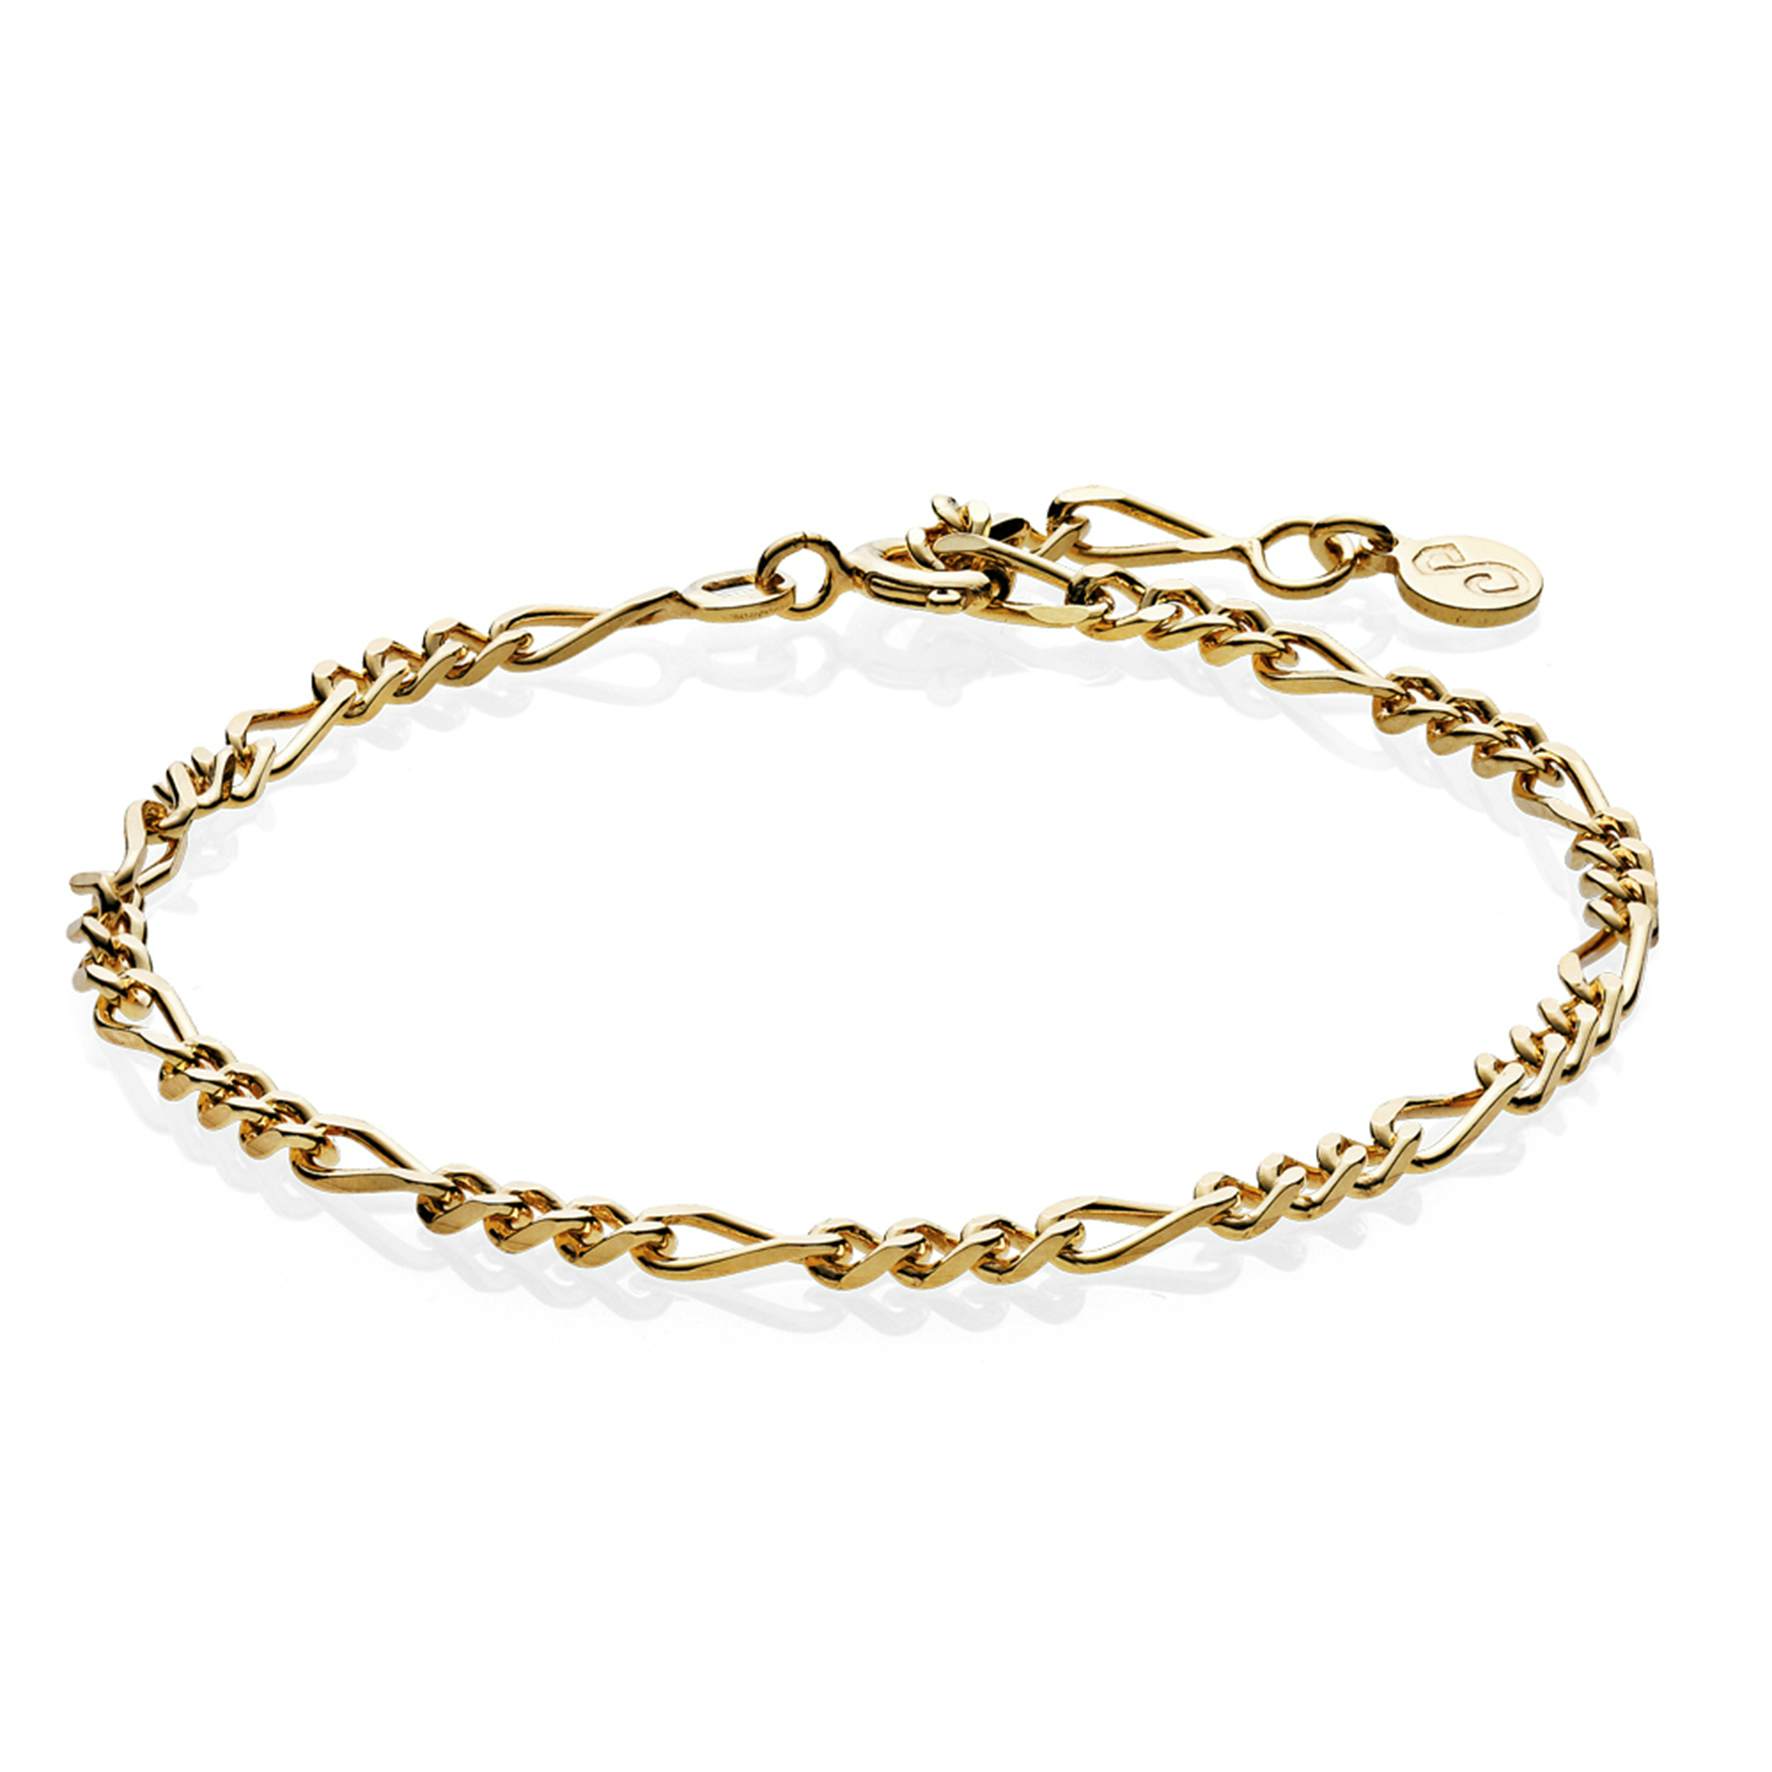 Lizzy Anklet from Sistie in Goldplated-Silver Sterling 925